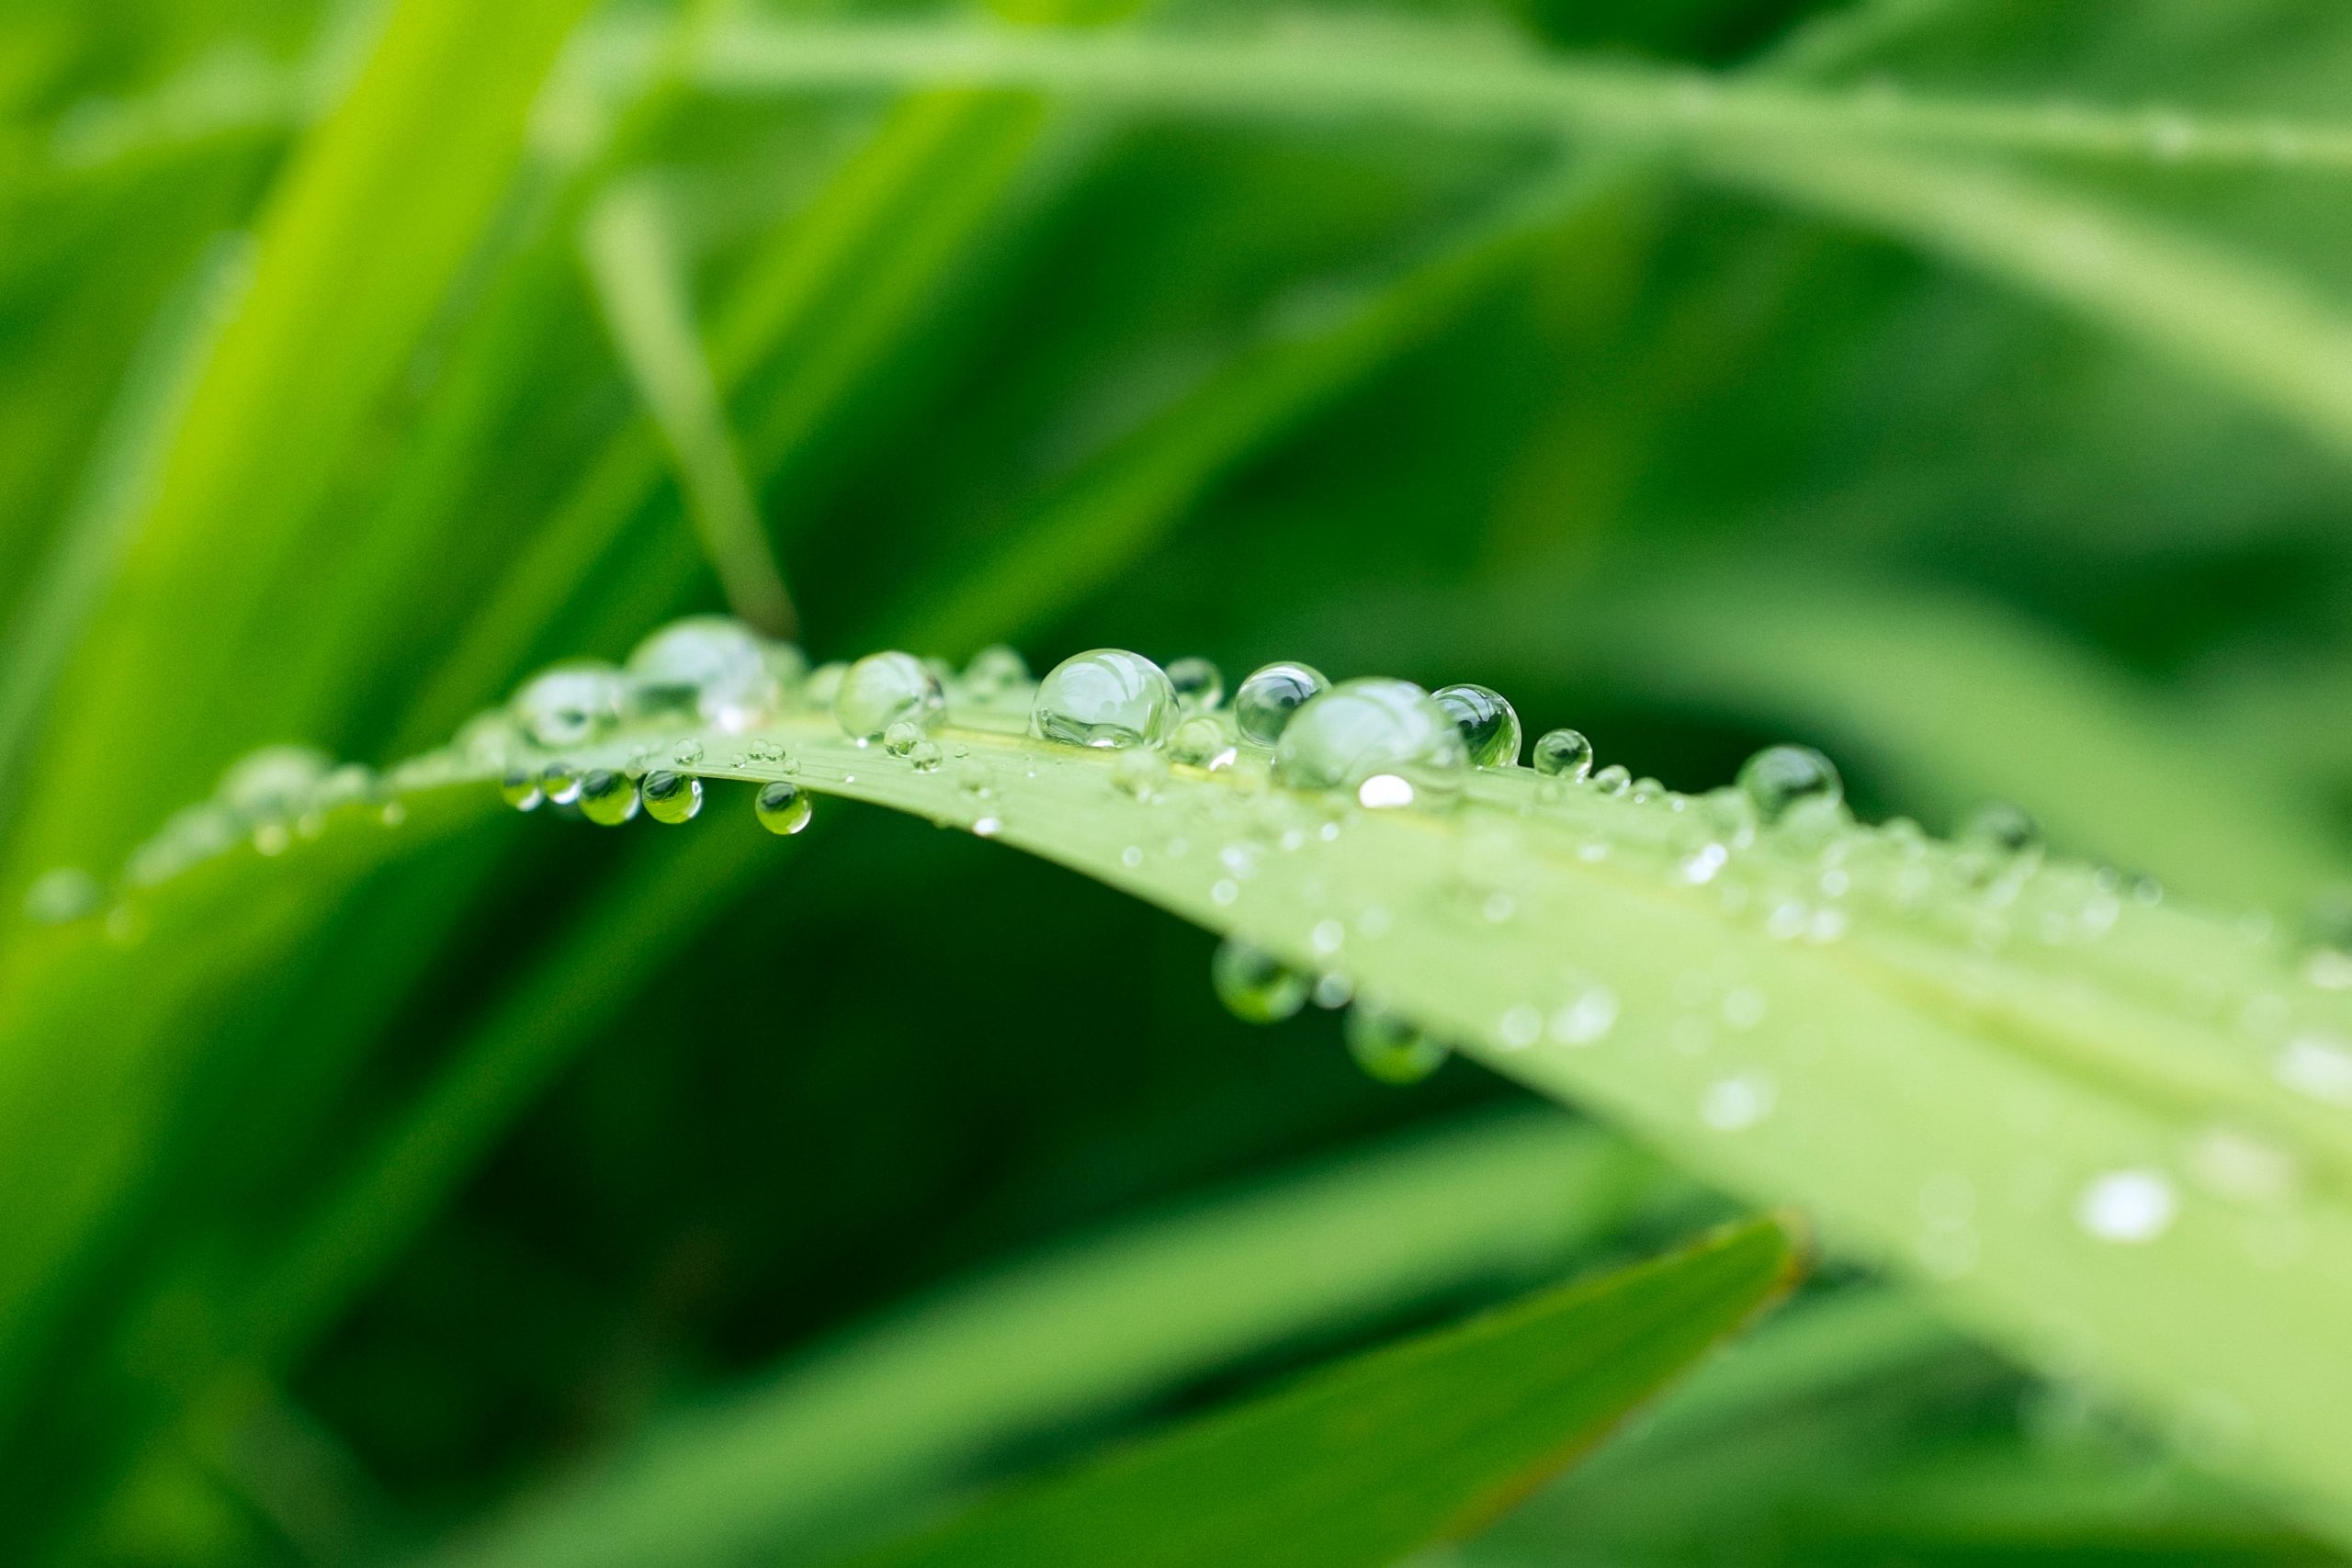 Water droplets on green grass